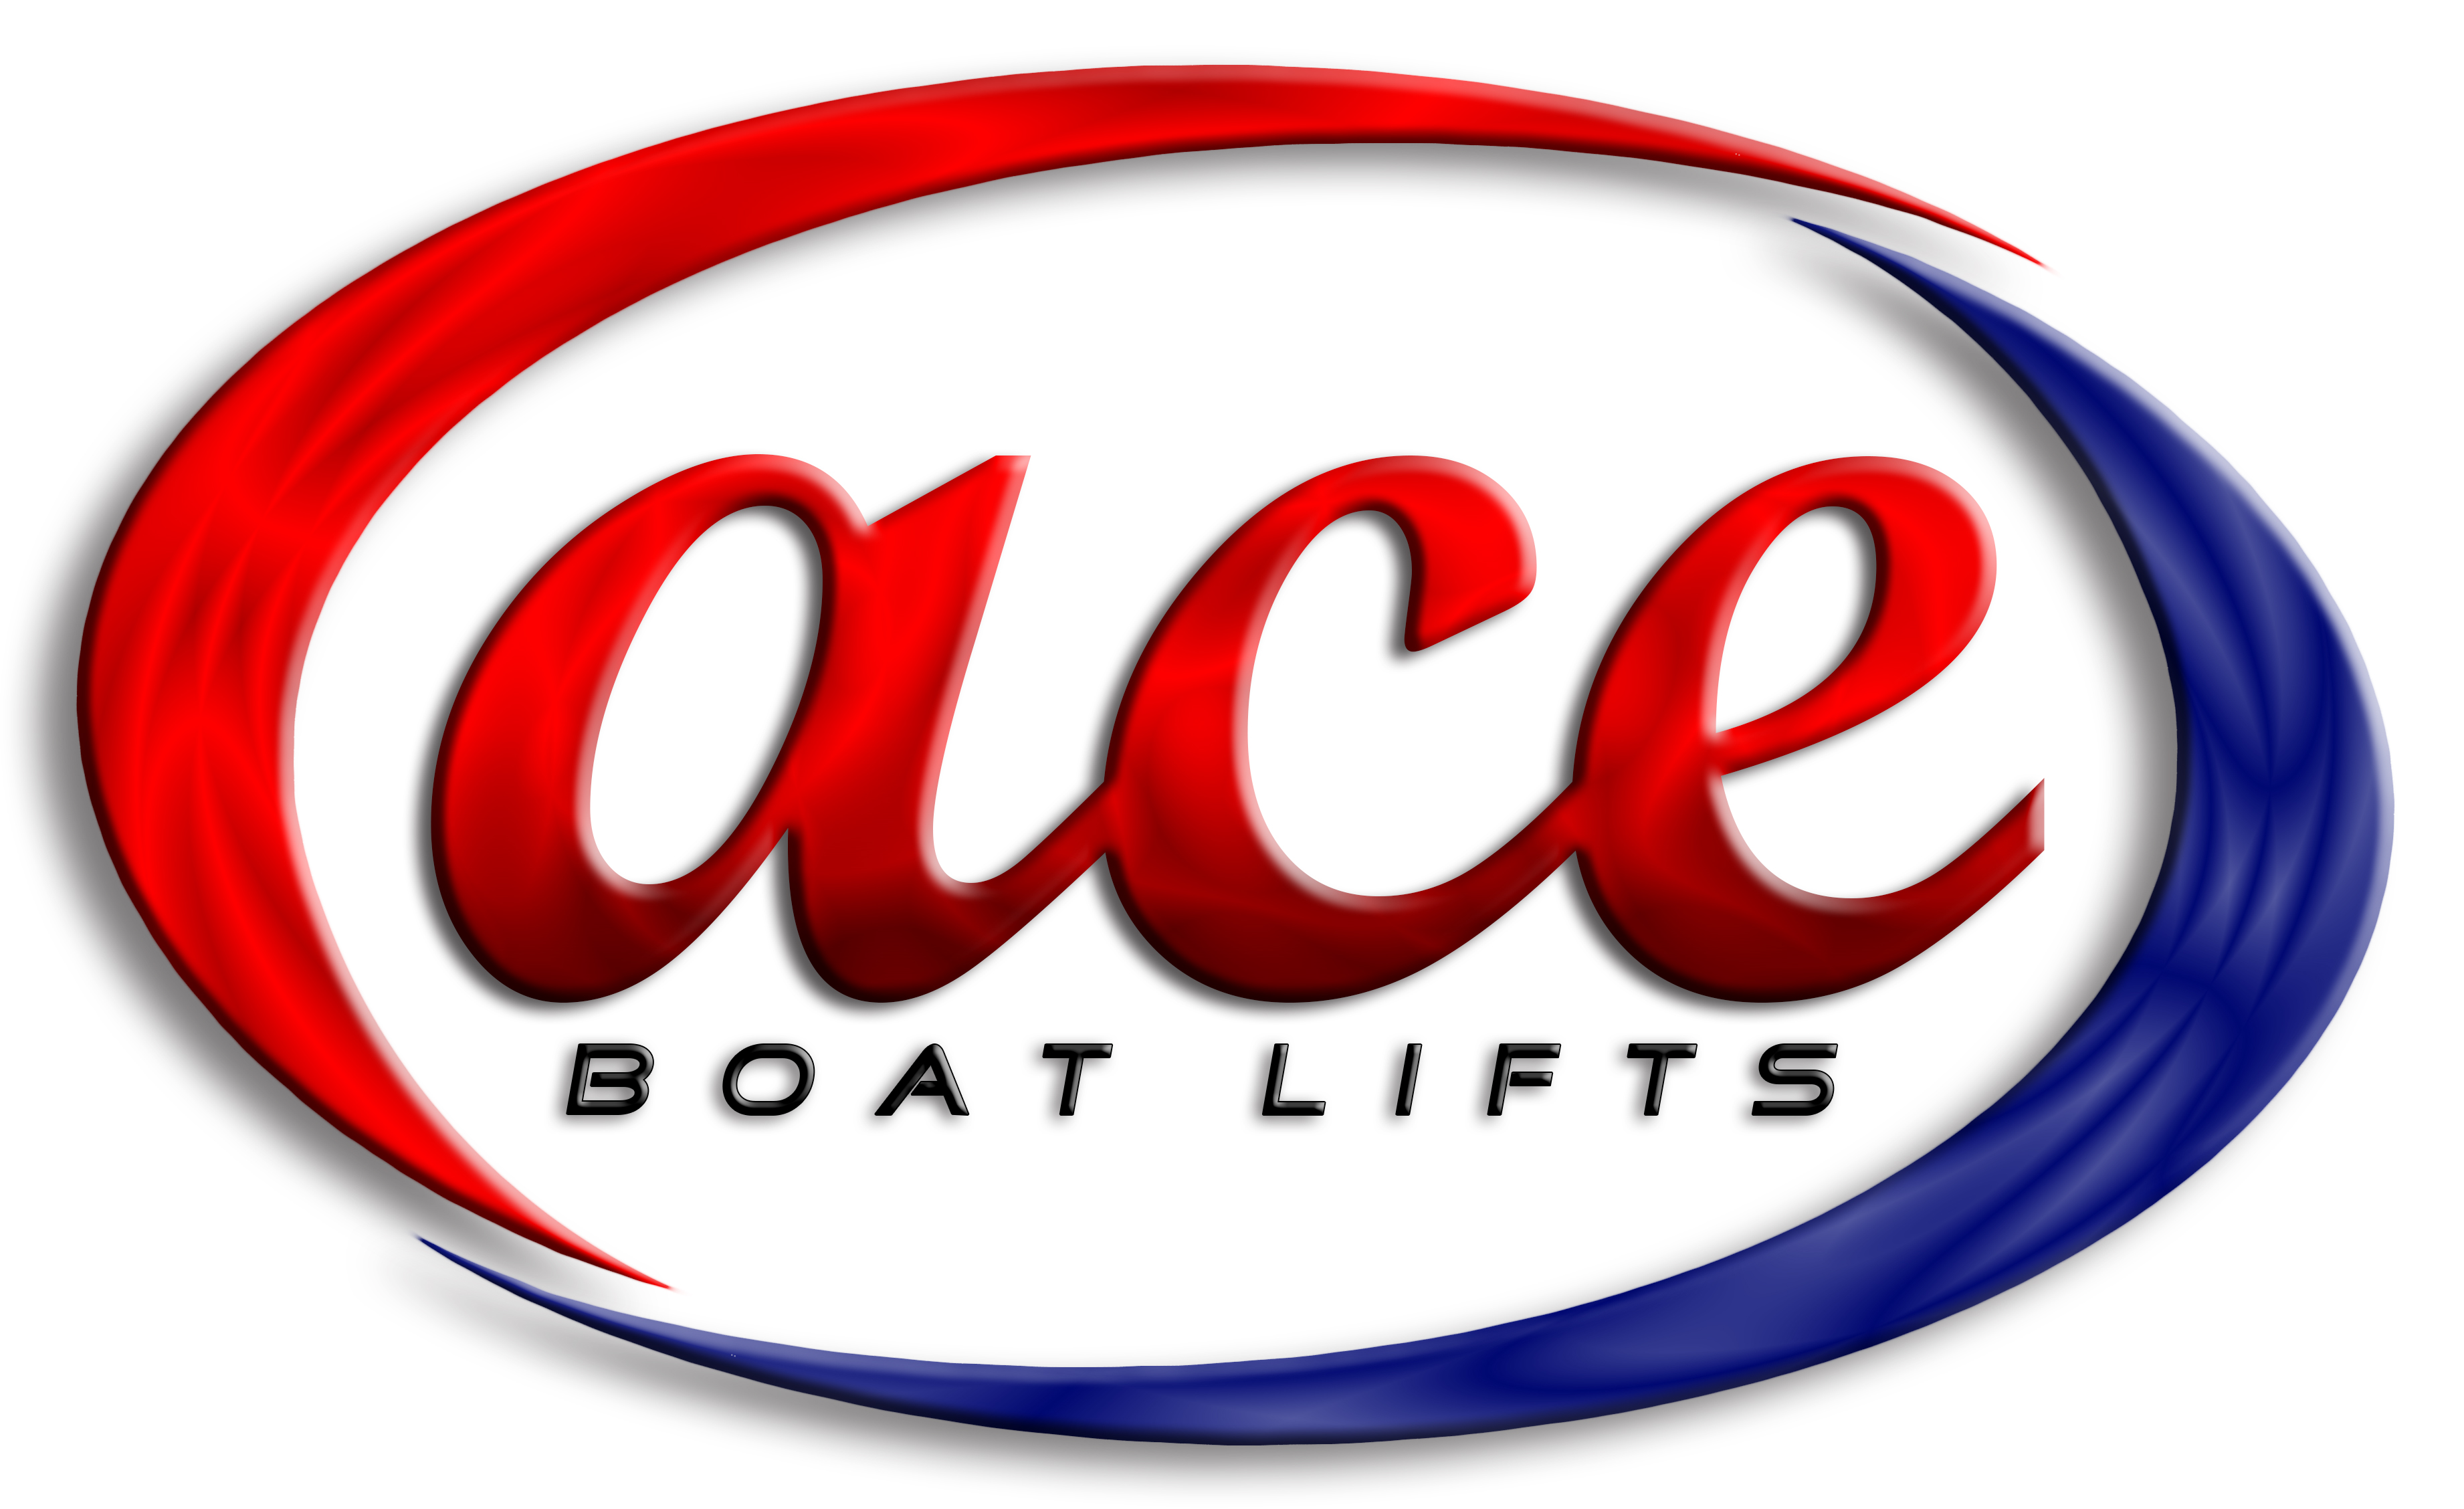 ACE BOAT LIFTS